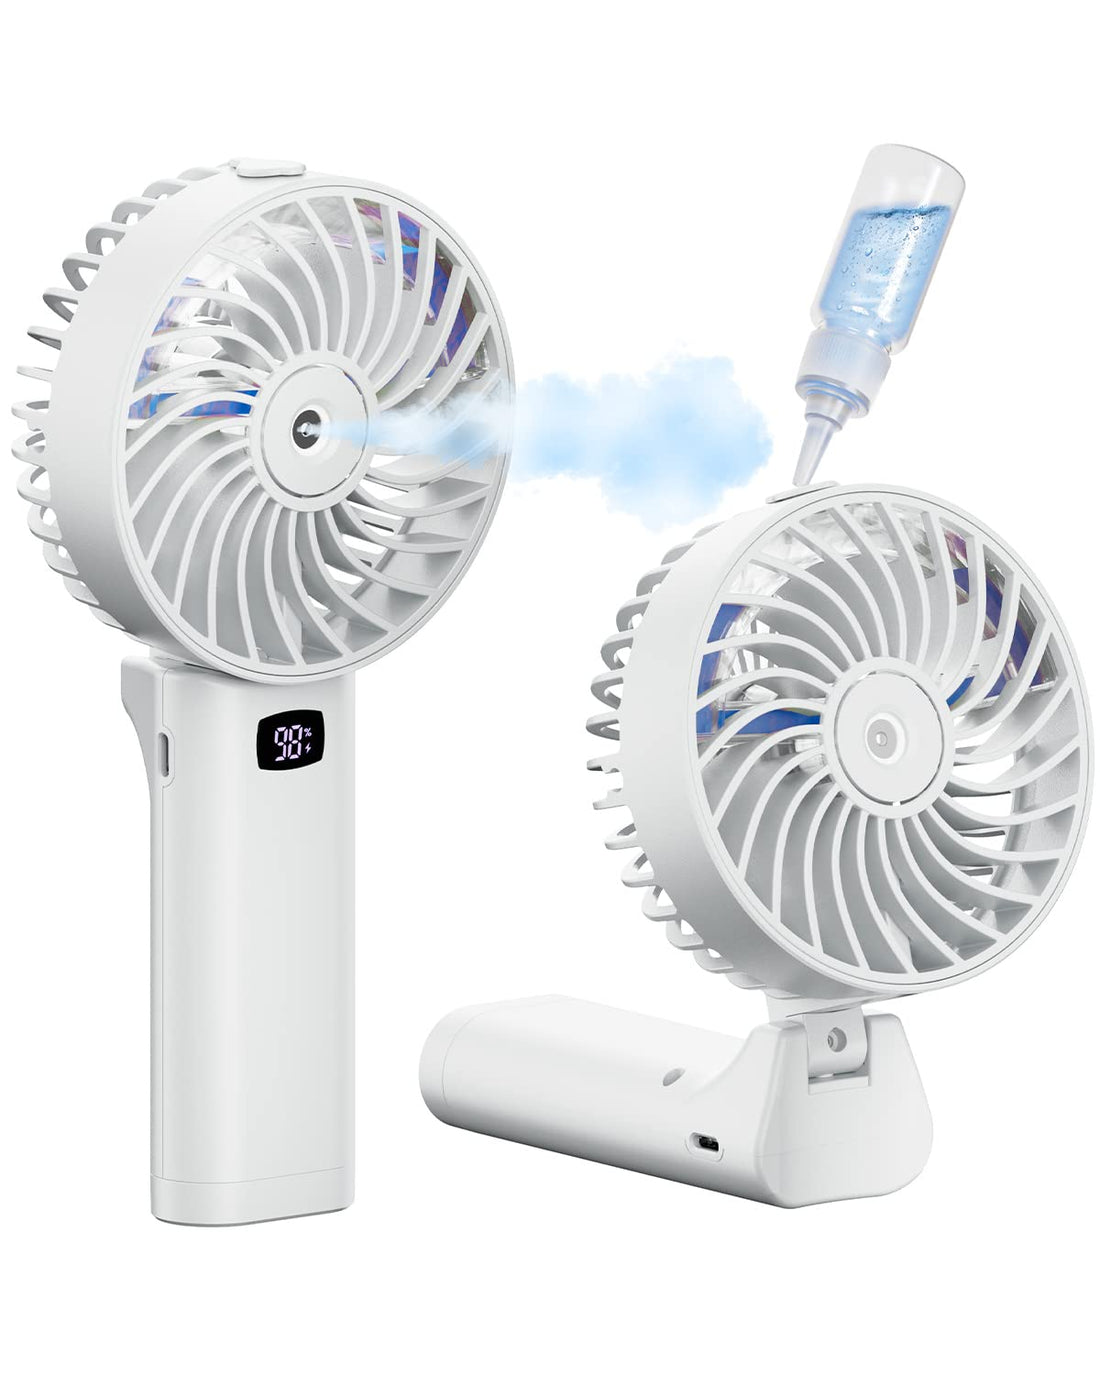 Gaiatop Portable Handheld Misting Fan, 4000mAh Rechargeable Personal Mister Fan, 4 Adjustable Speed Mist Fan, 180°Foldable, Mini Face Steamer for Trave, Camping, Outdoors, Makeup, White